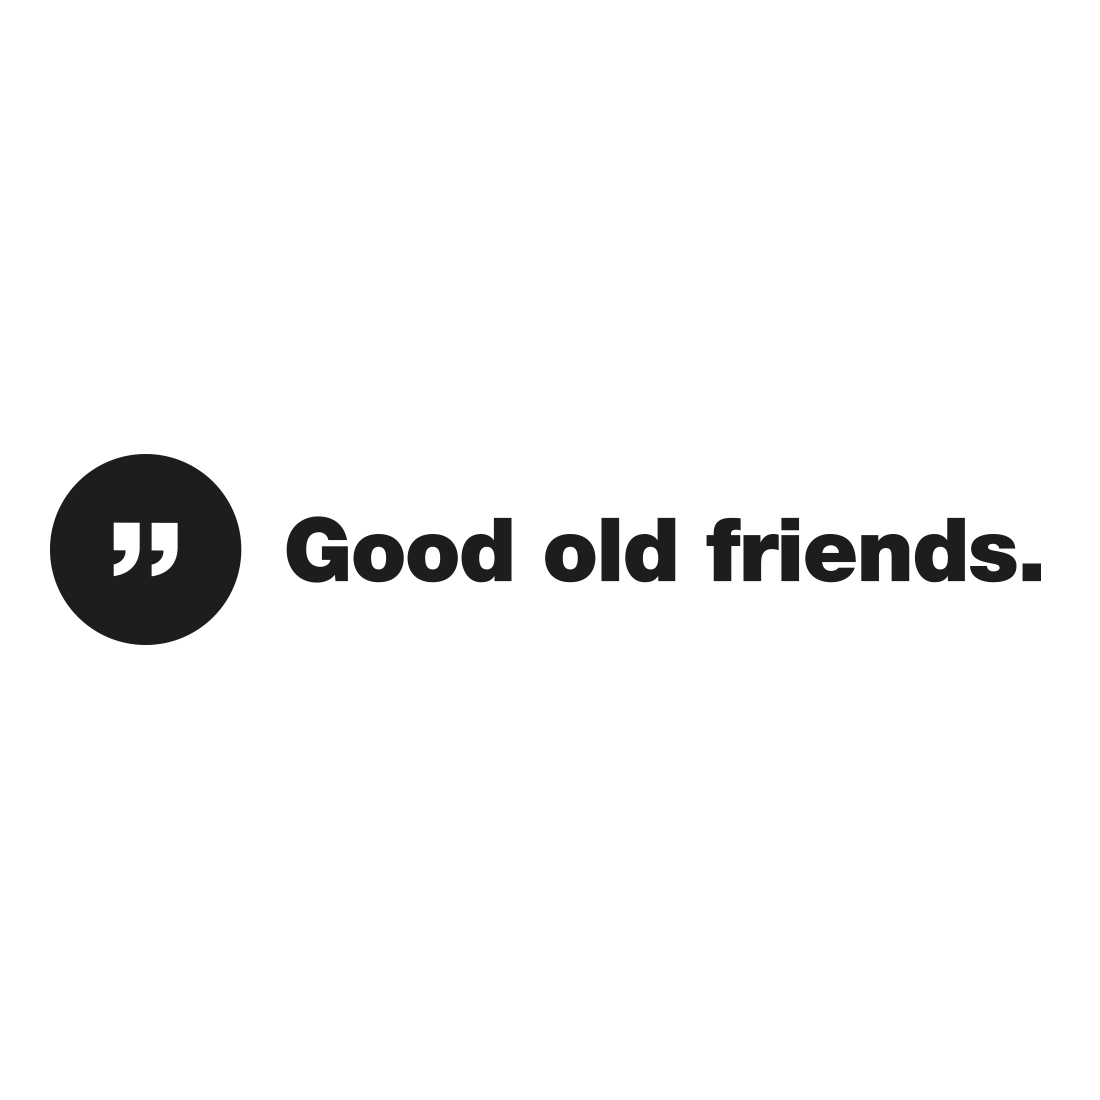 Good old friends.